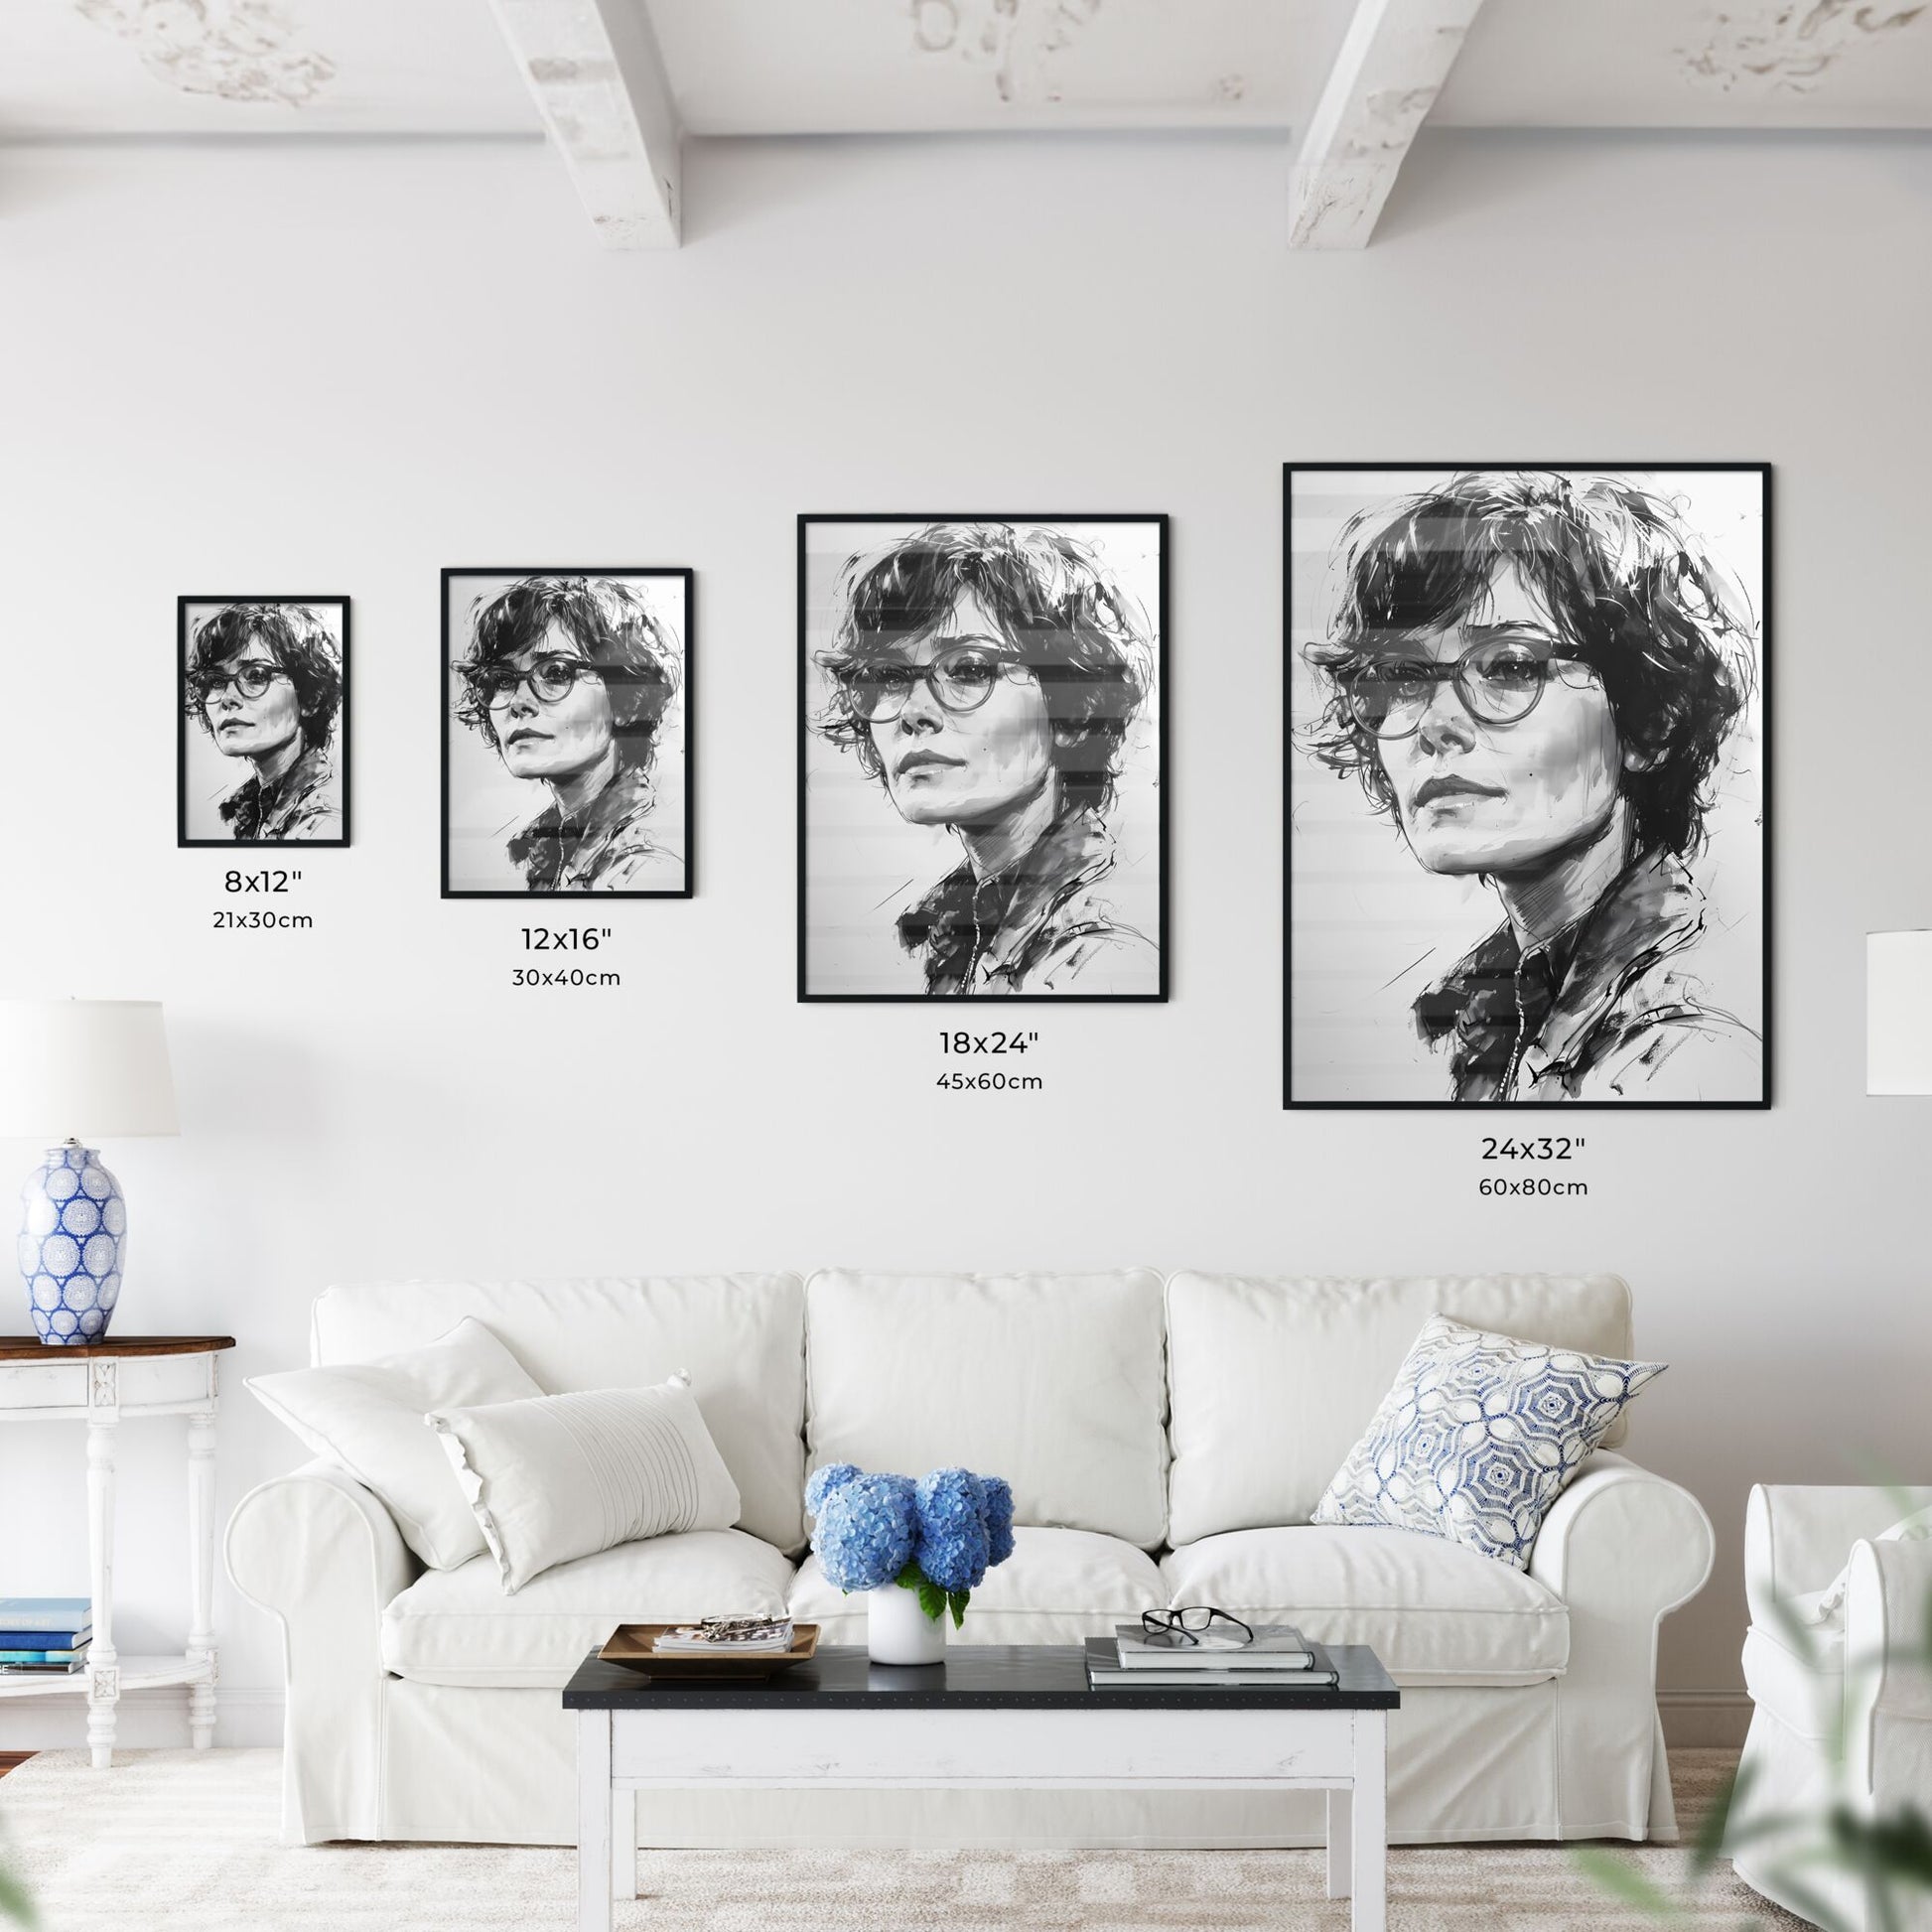 A Poster of ink drawing - A Drawing Of A Woman Wearing Glasses Default Title